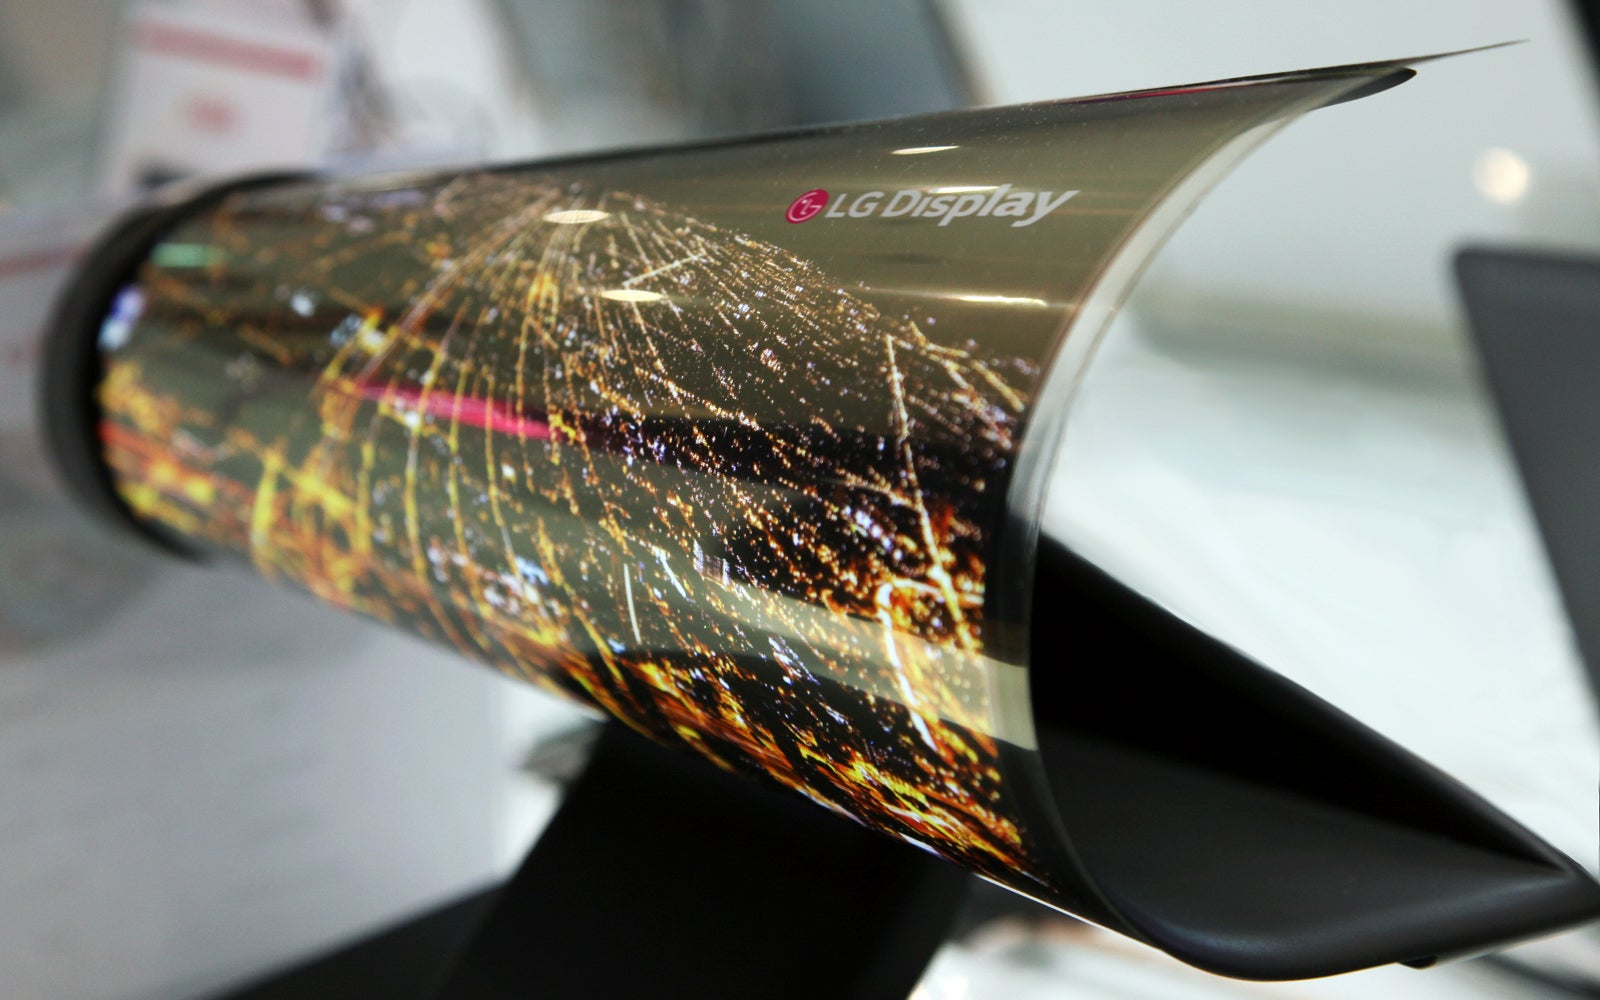 LG is going to showcase this rollable display prototype at CES '16, but will it let us touch is? - This LG rollable display prototype gives us a taste of things to come